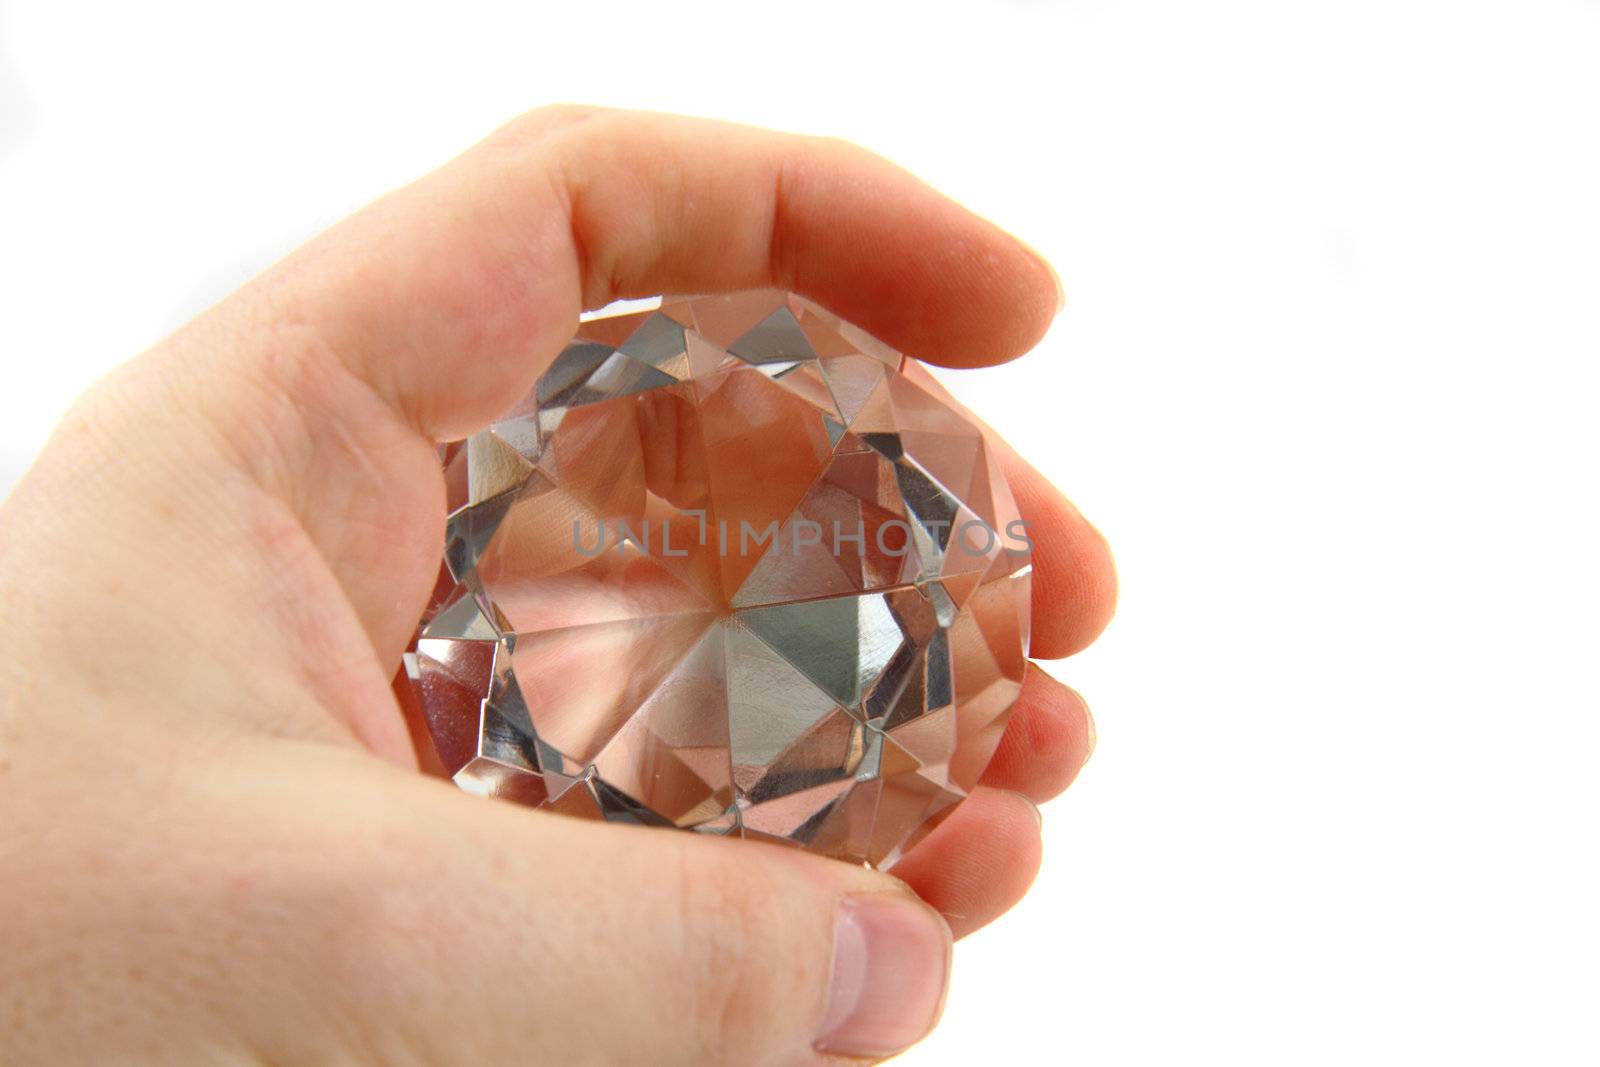 diamond in the hand isolated on the white background